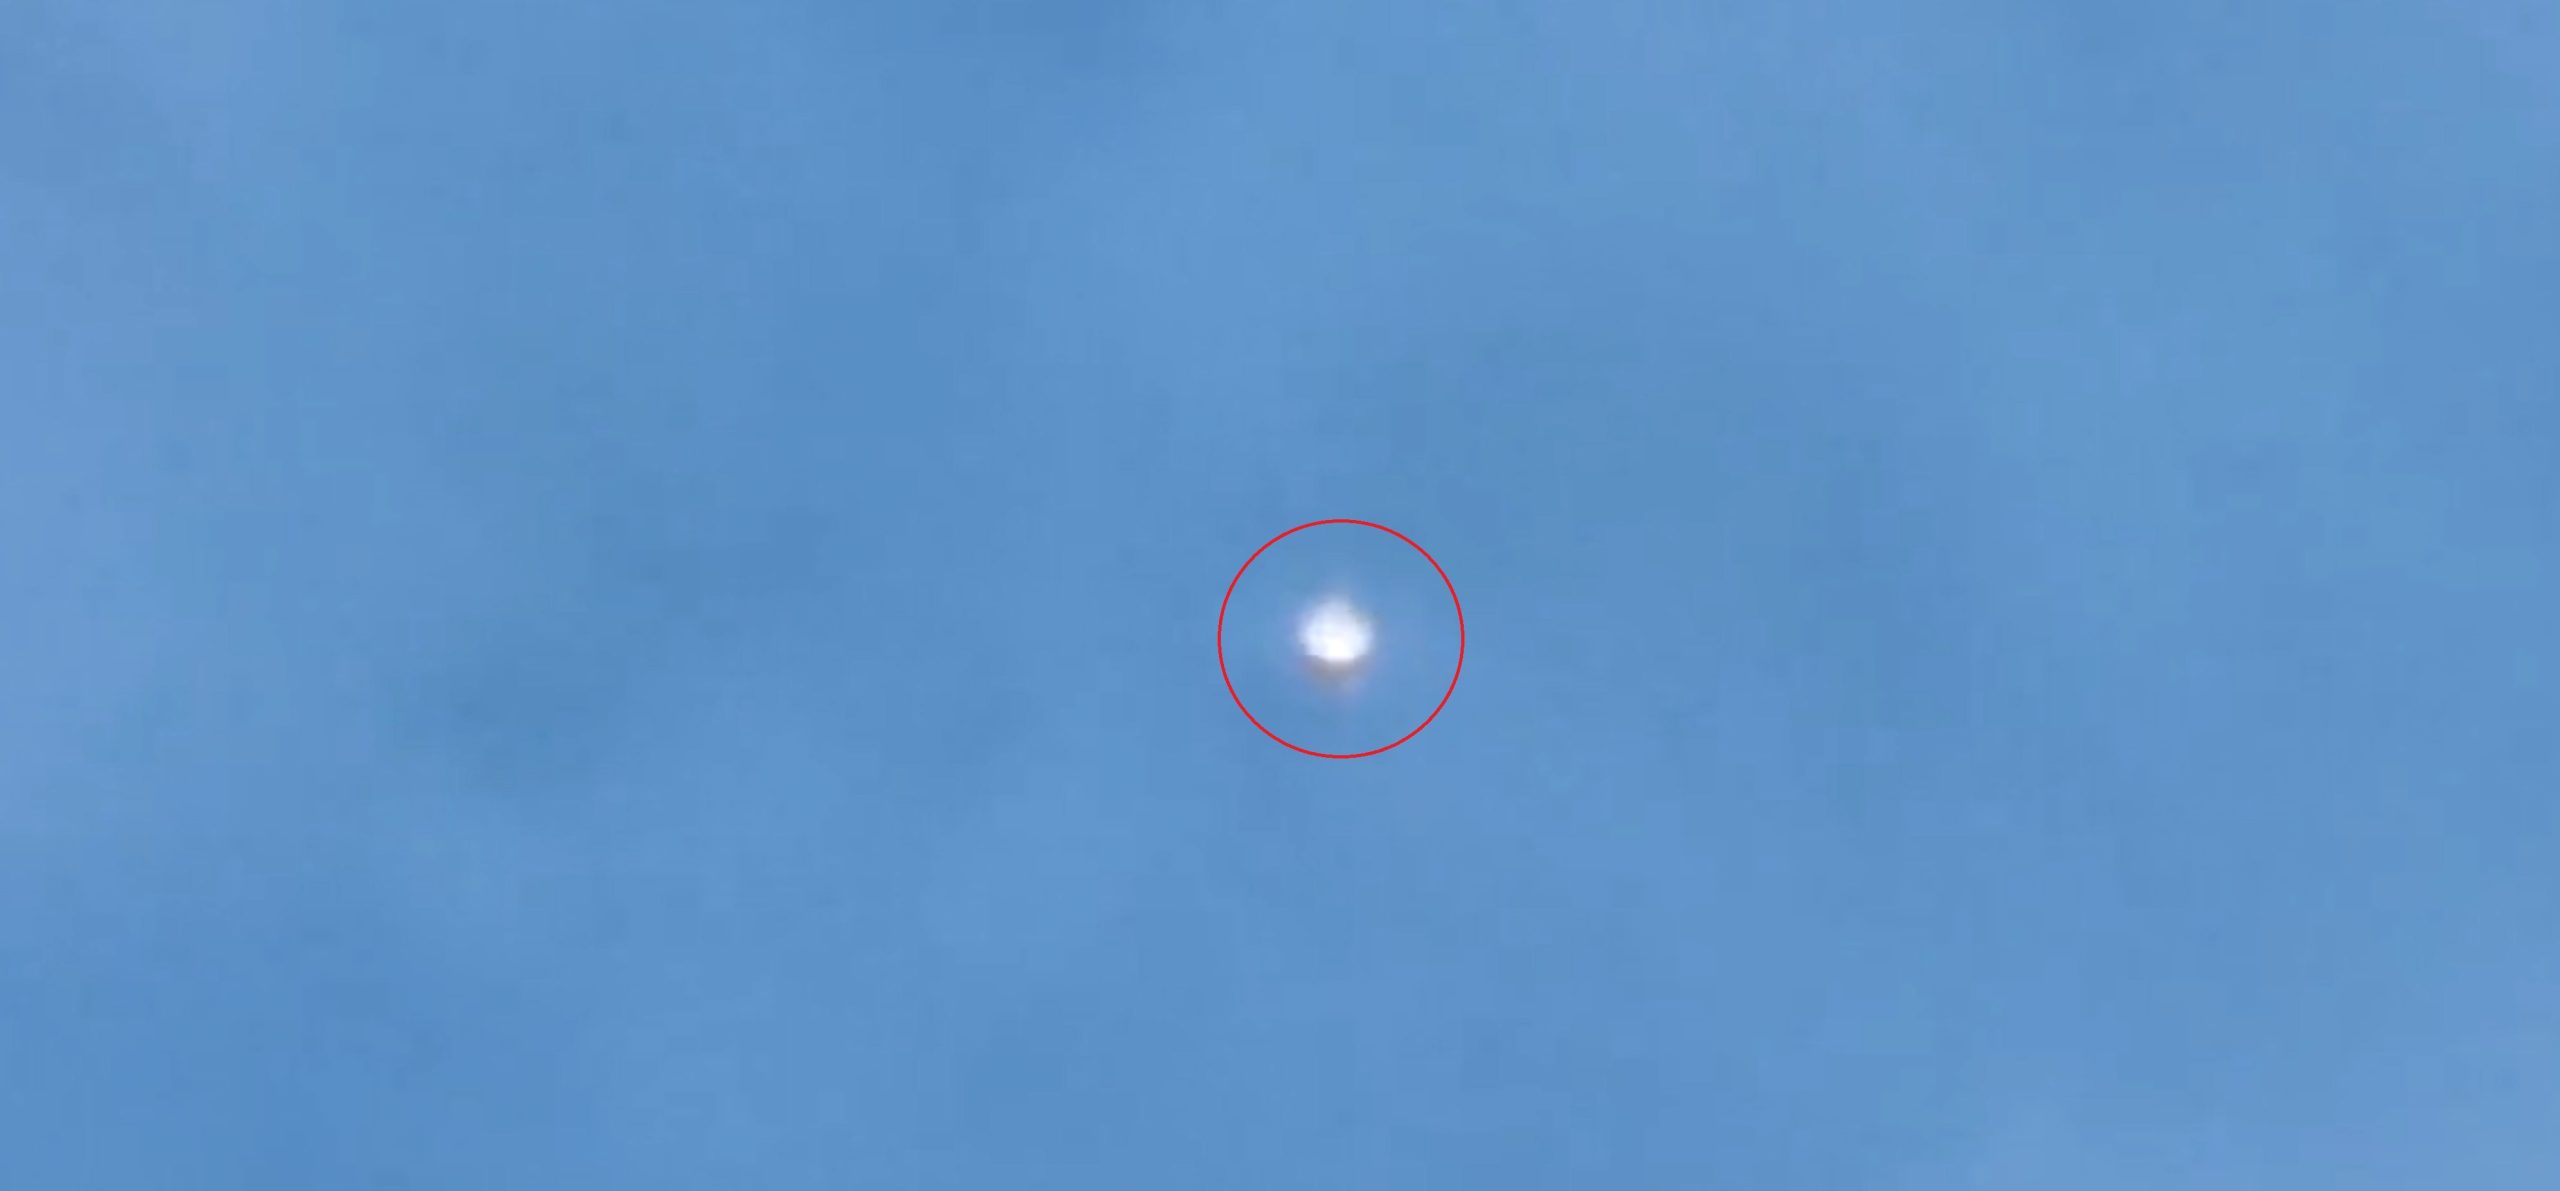 A screenshot of the video showing the Cube-shaped UFO. Image Credit: Twitter/ Twitter user Think Tank.